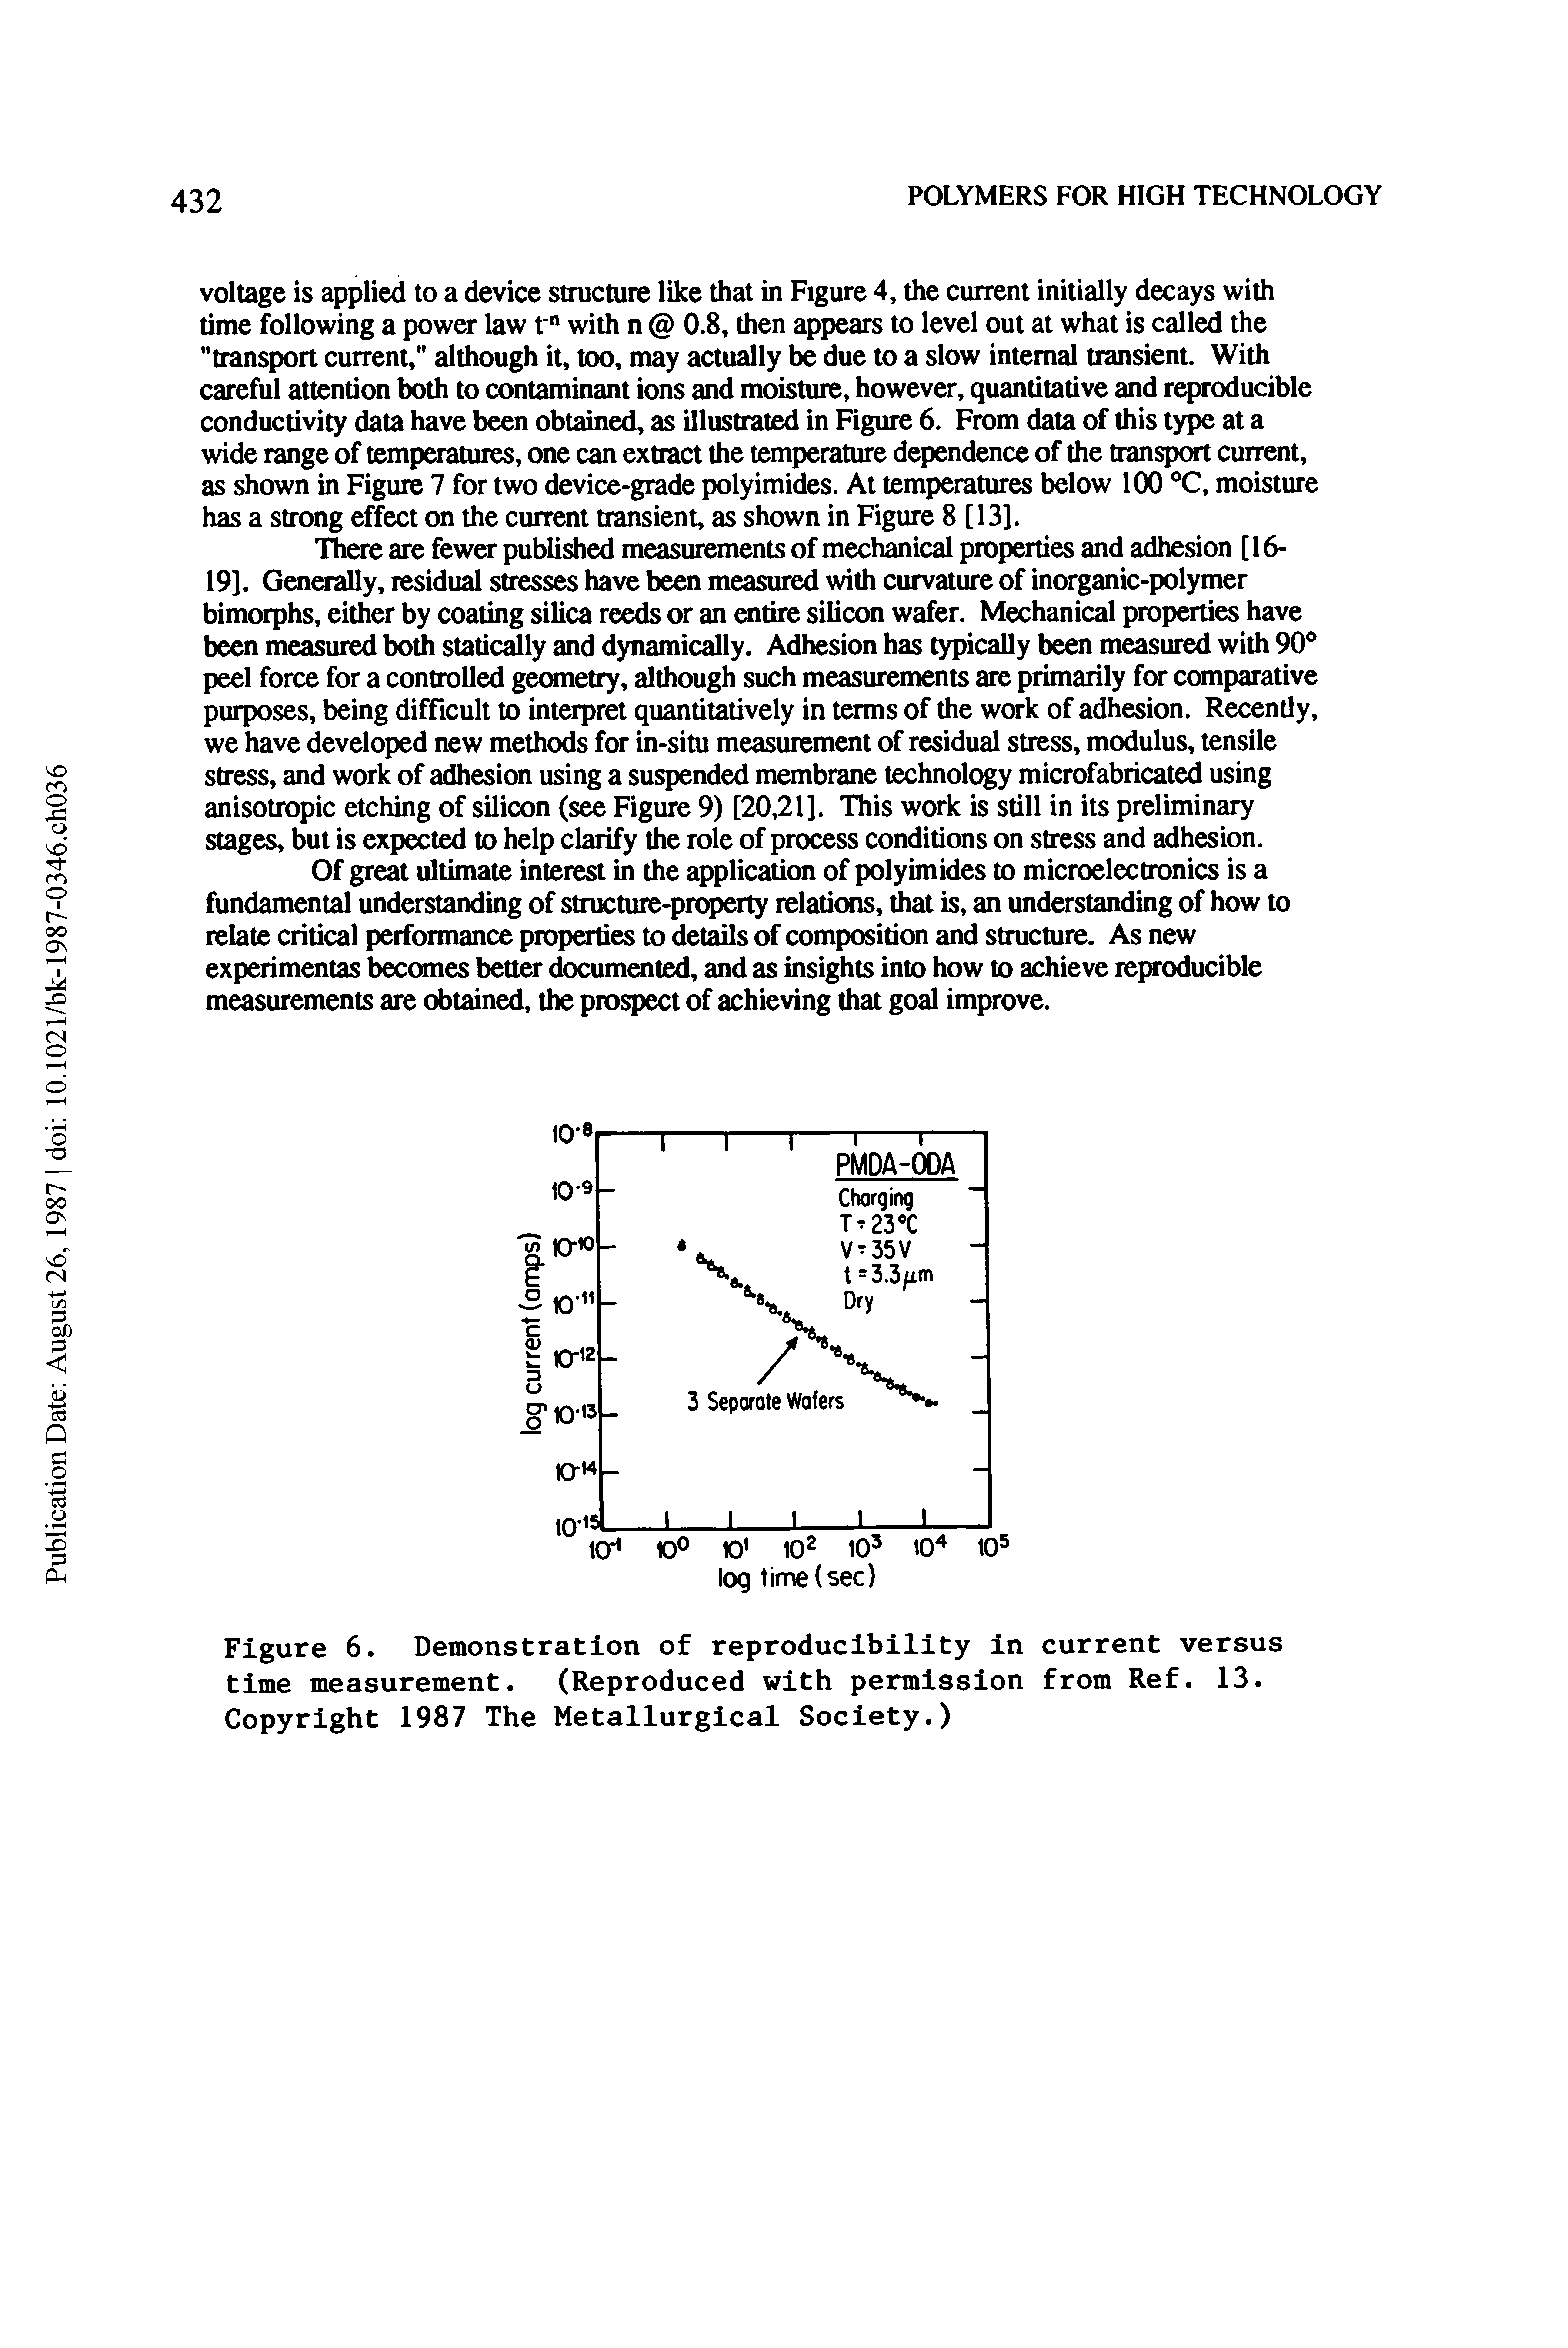 Figure 6. Demonstration of reproducibility in current versus time measurement. (Reproduced with permission from Ref. 13. Copyright 1987 The Metallurgical Society.)...